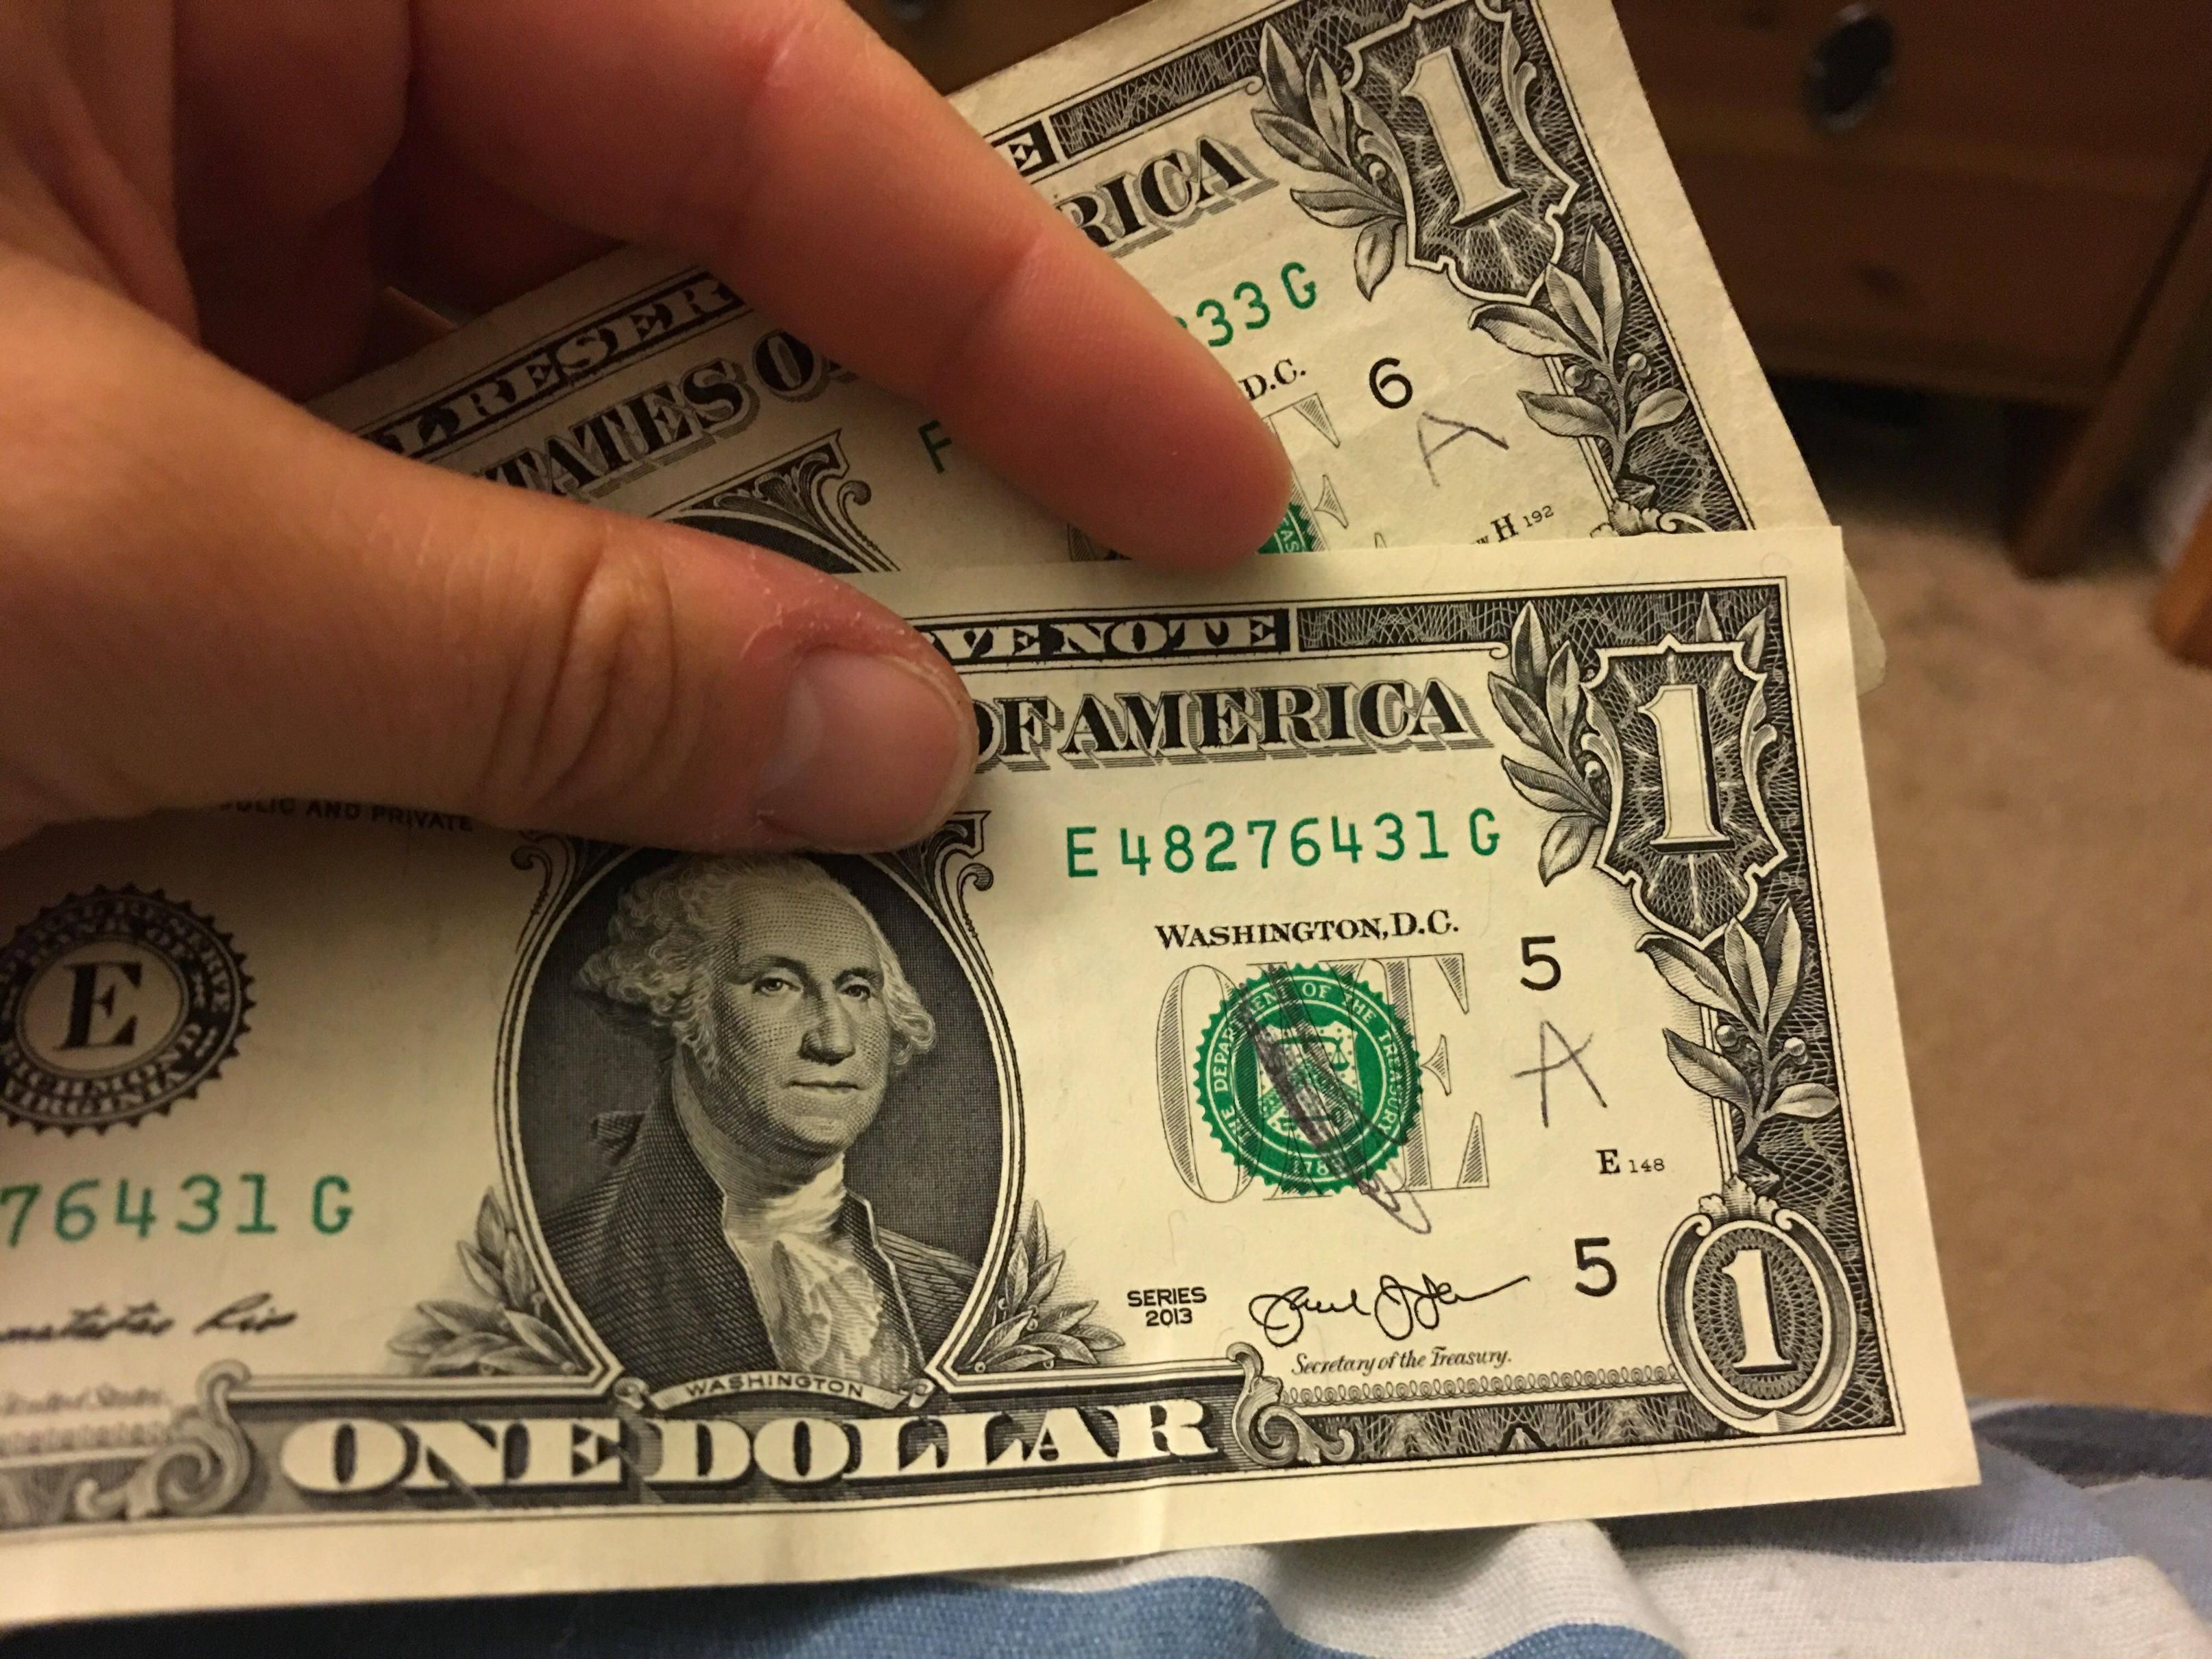 My kid marked all of my one dollar bills to see if the tooth fairy is fake